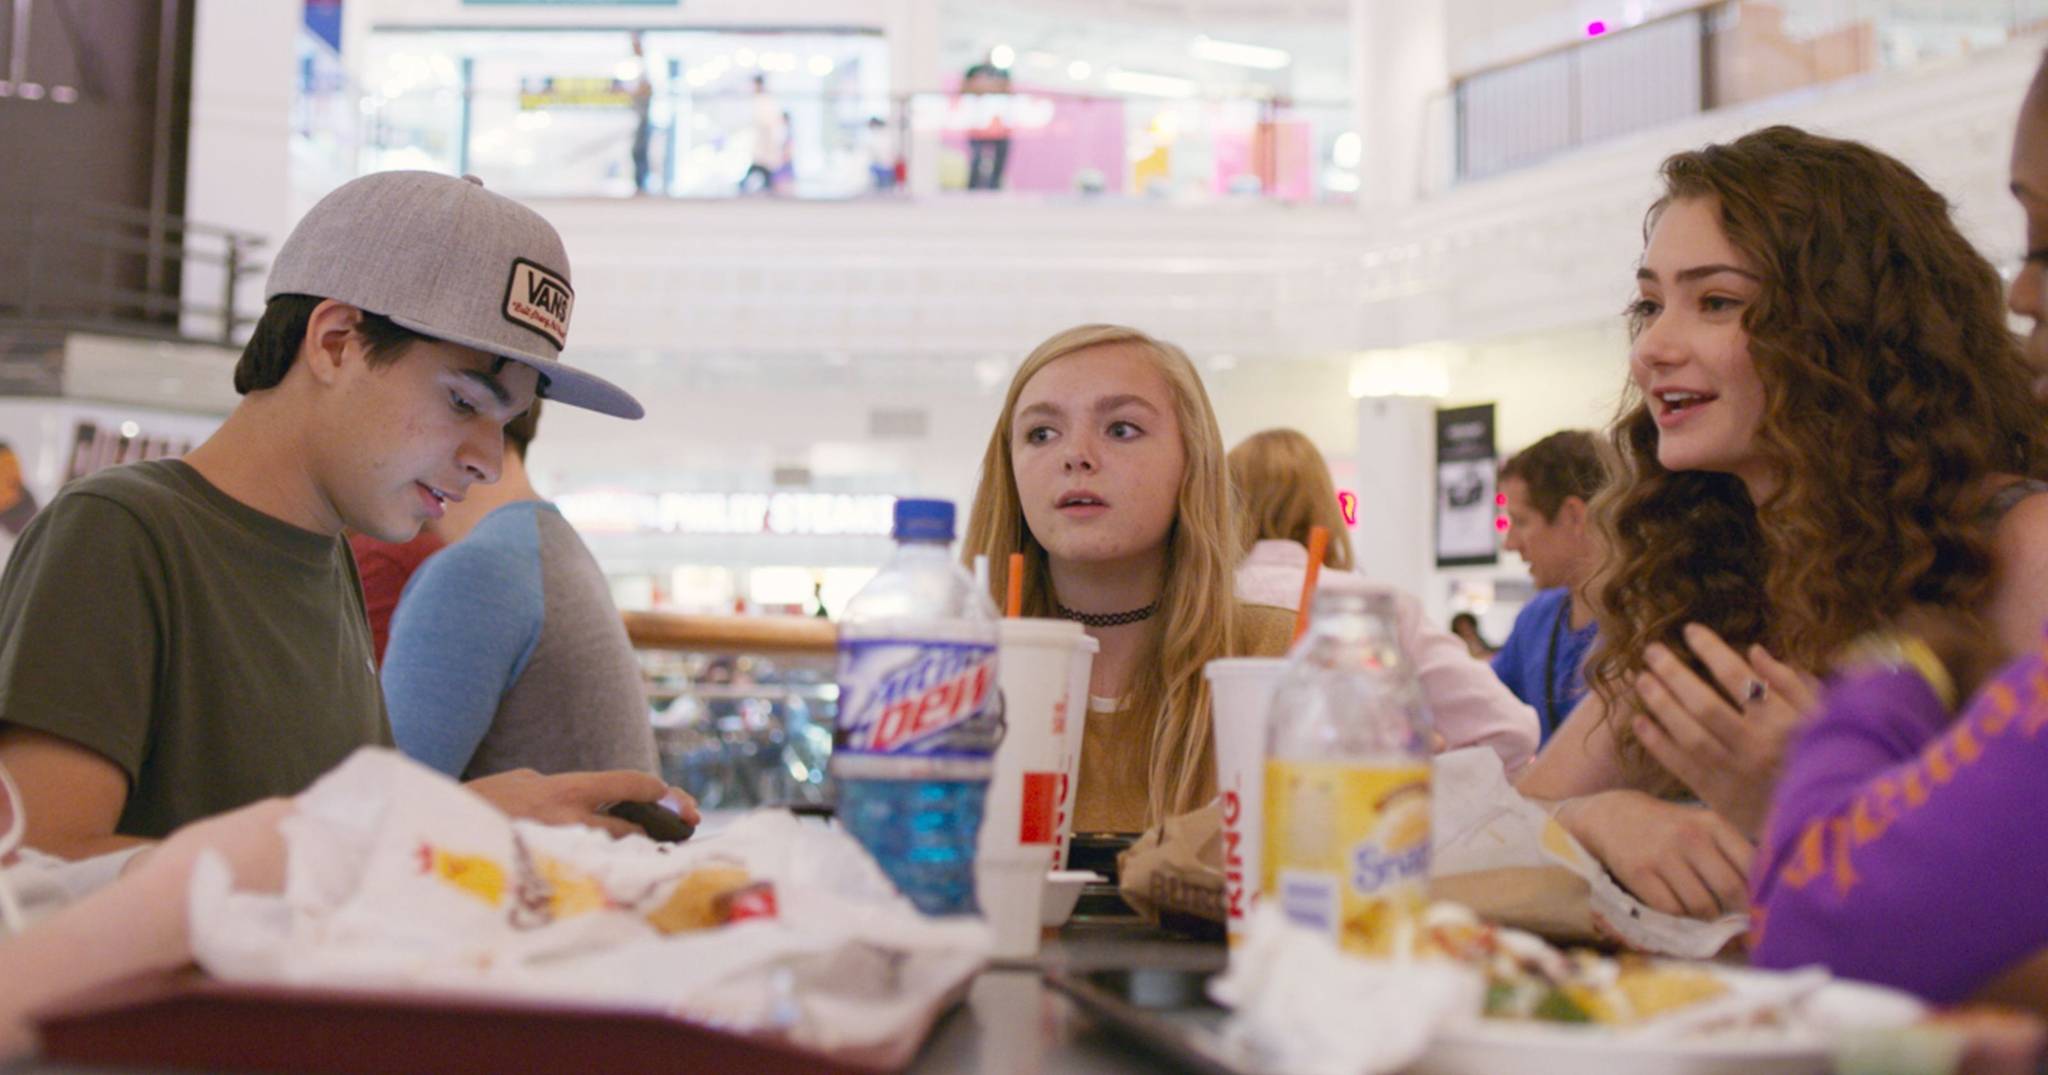 Eighth Grade: a truthful take on the teen experience